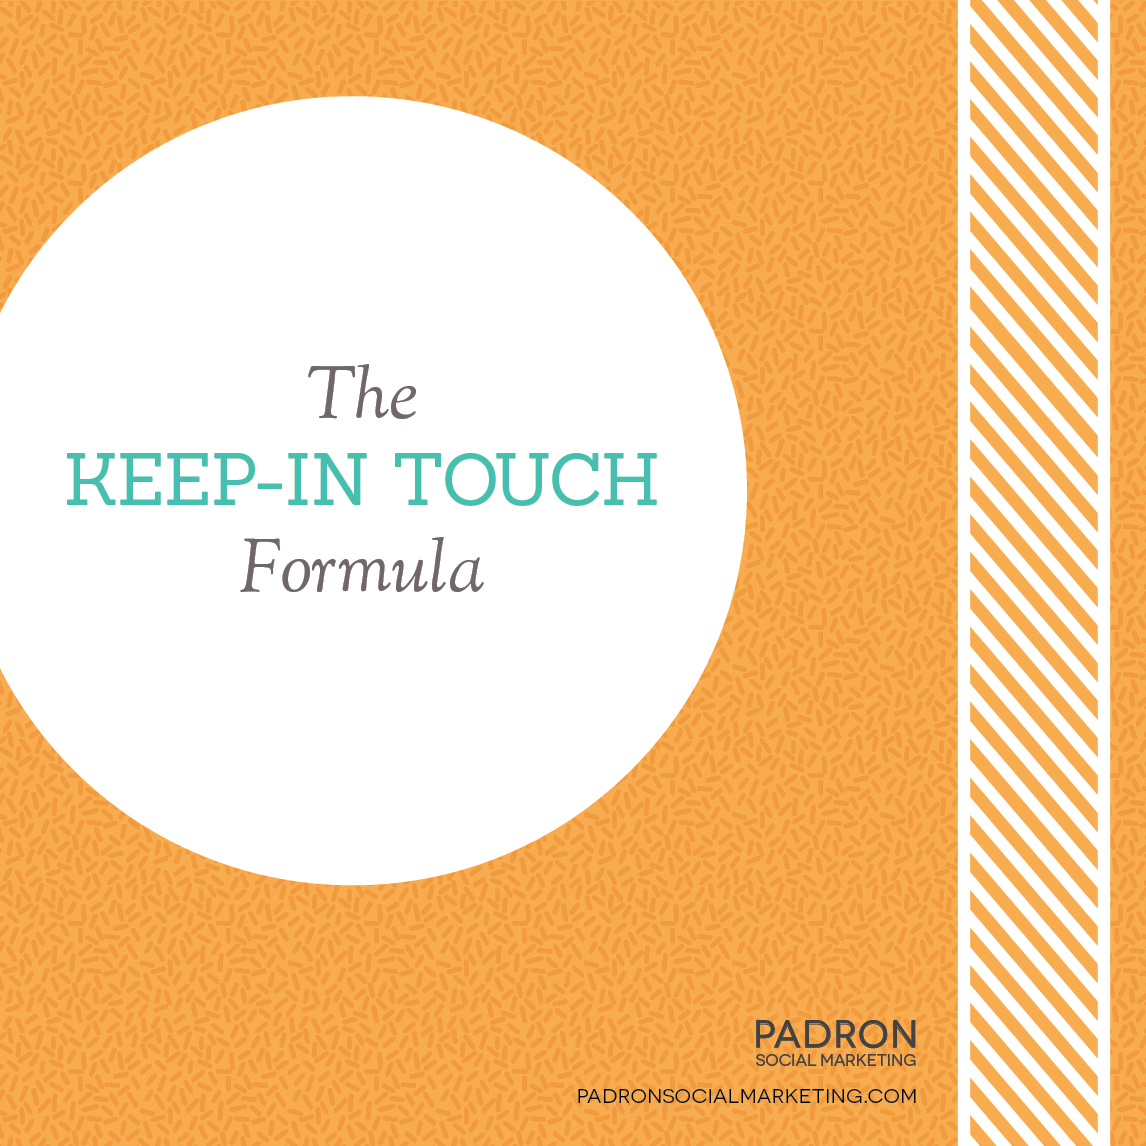 The Keep-in-Touch Formula